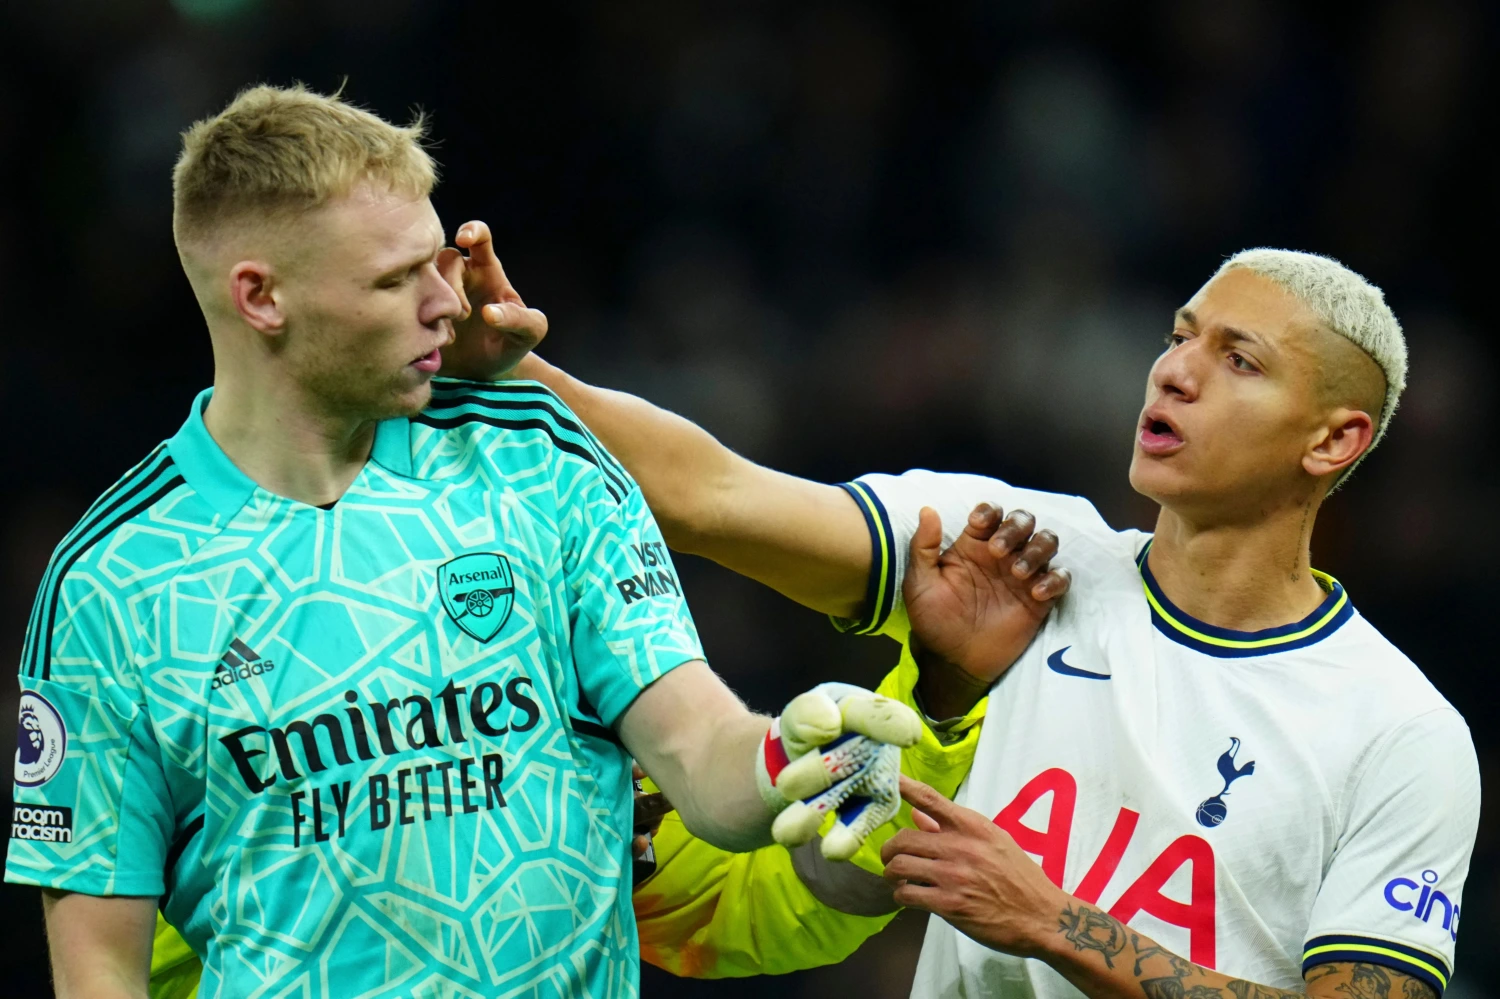 SHOCKING: FA will not punish Richarlison despite deliberately smacking Ramsdale in the face during London derby